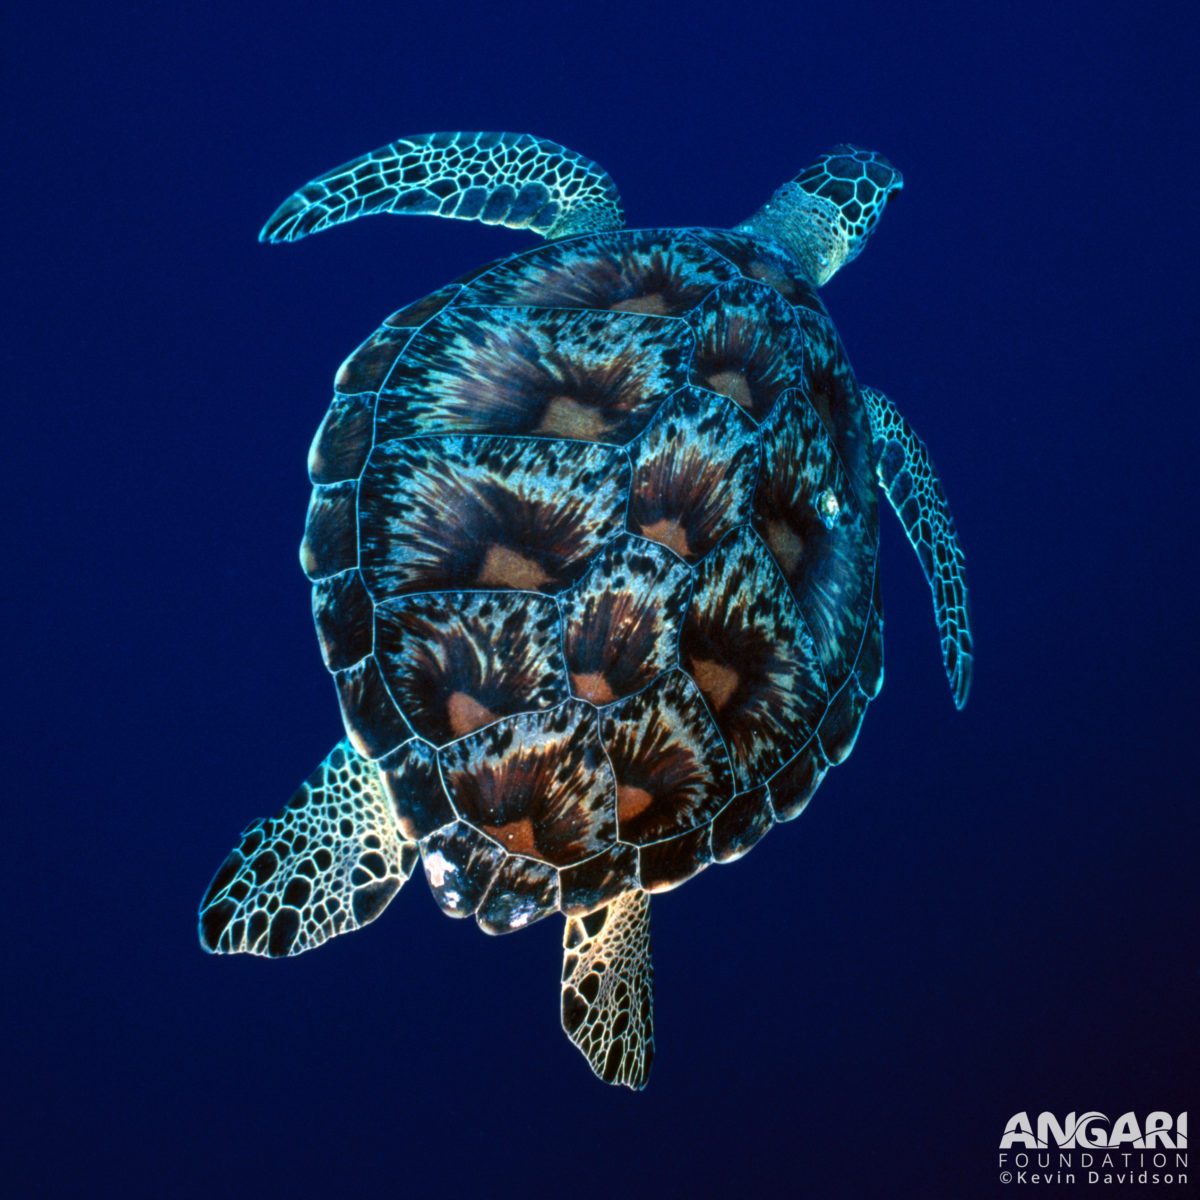 Green sea turtle showing off its patterned carapare